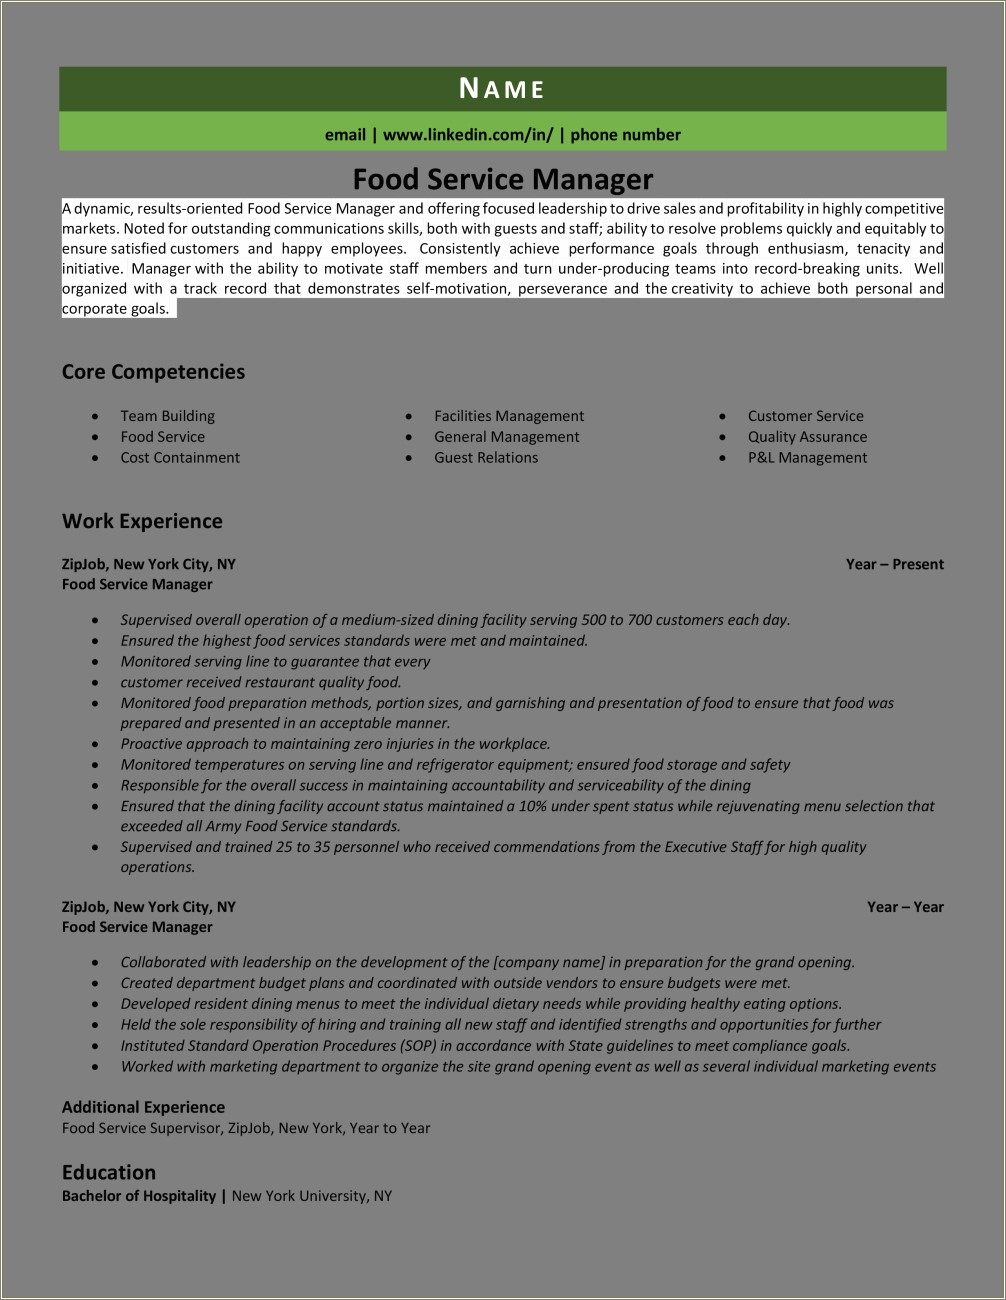 Resume Of A Food Service Manager